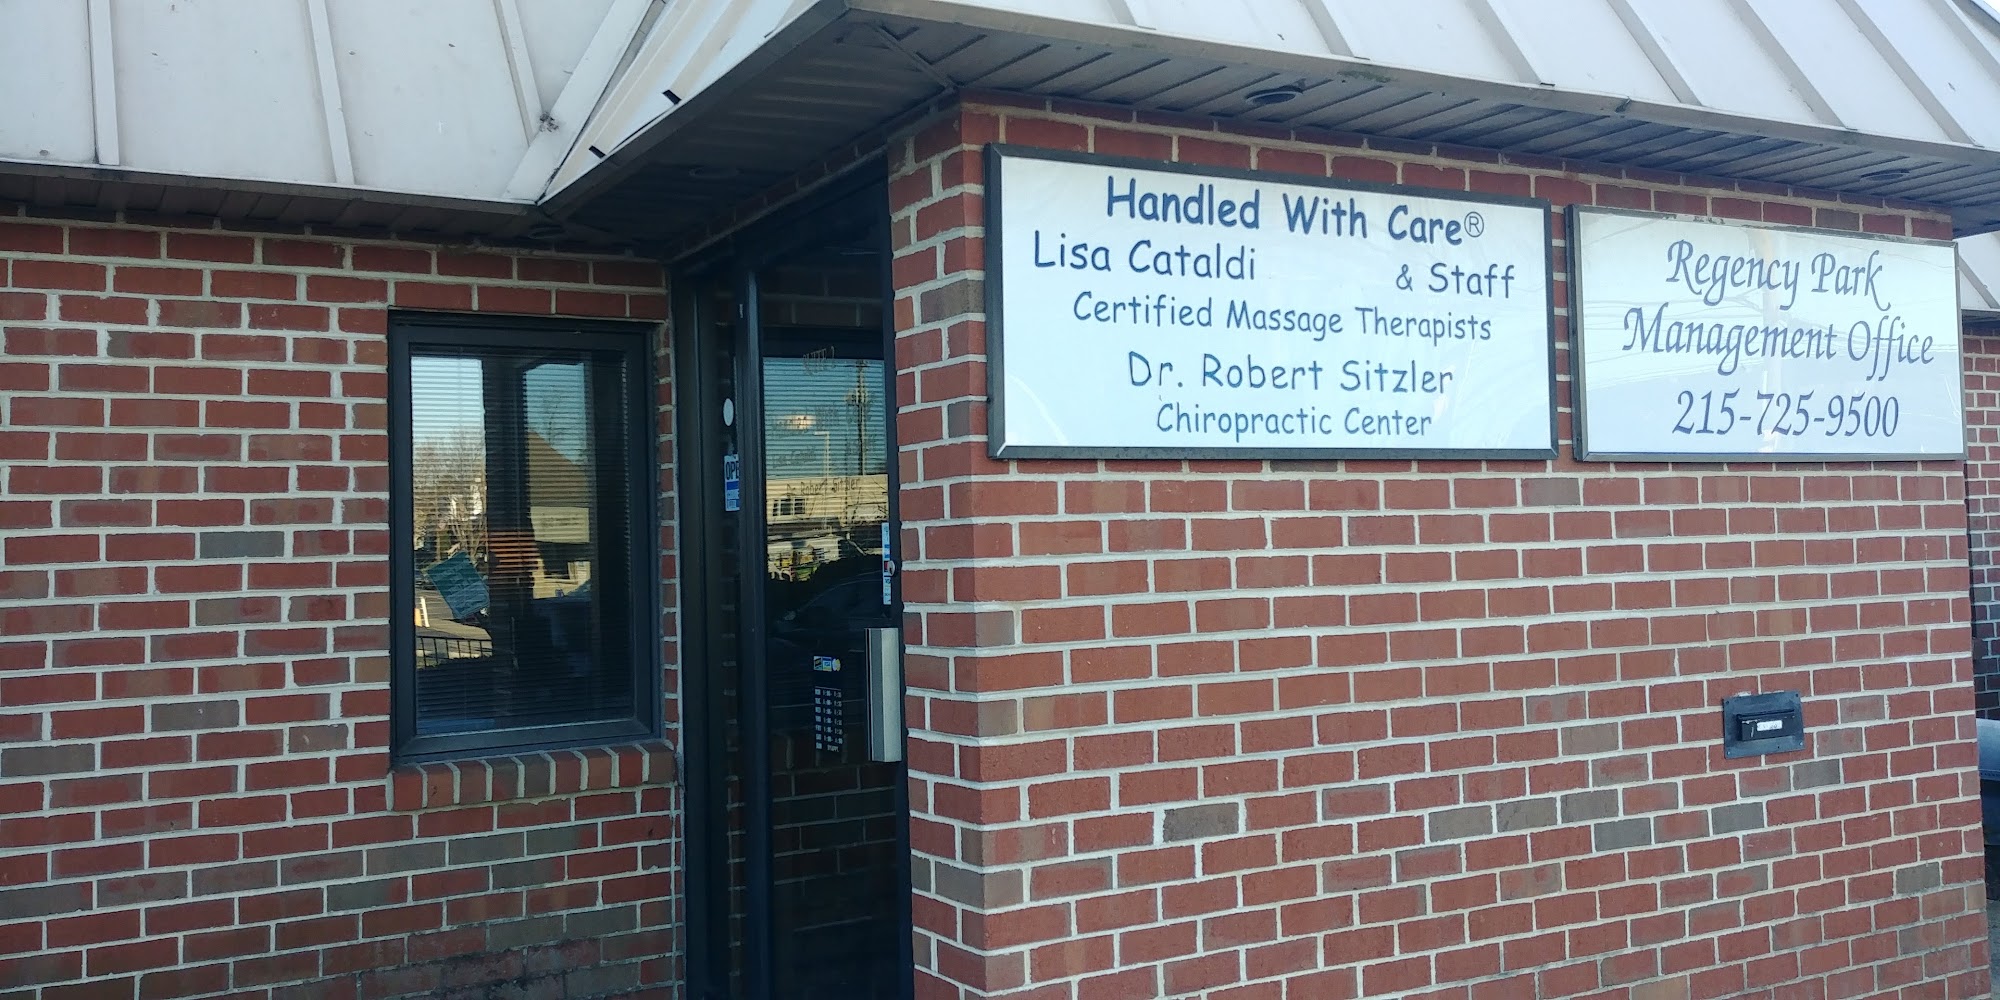 Handled With Care 145 Rockledge Ave, Rockledge Pennsylvania 19046